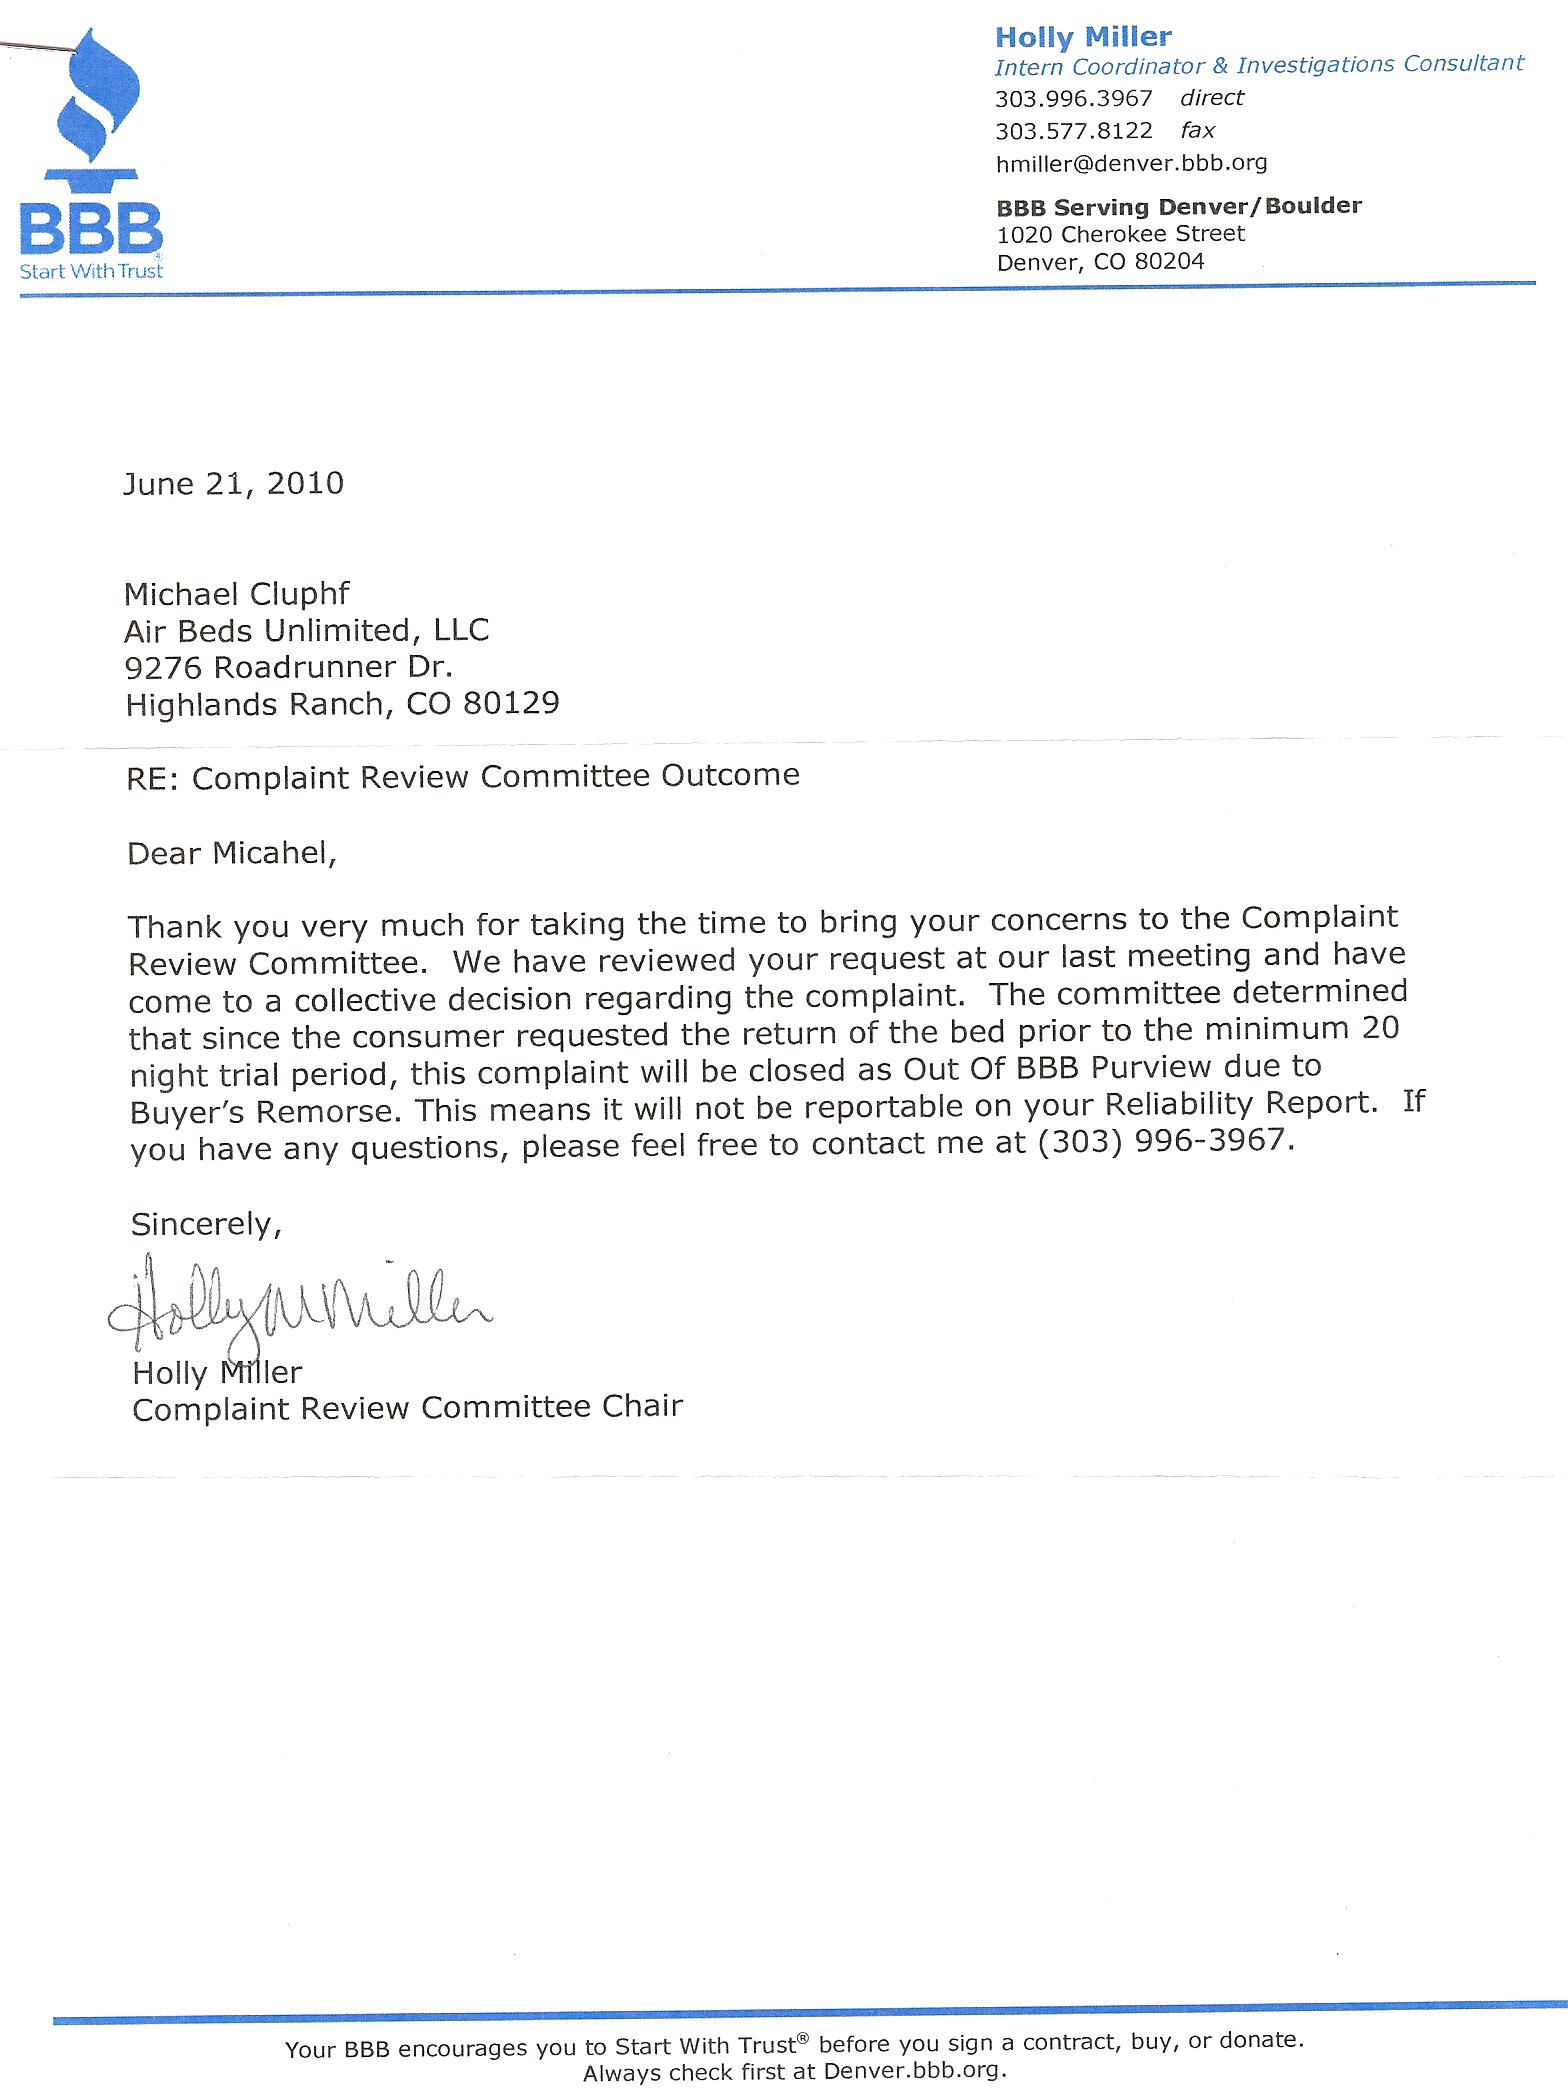 Copy of Dismissal Letter from the BBB.  Click to enlarge